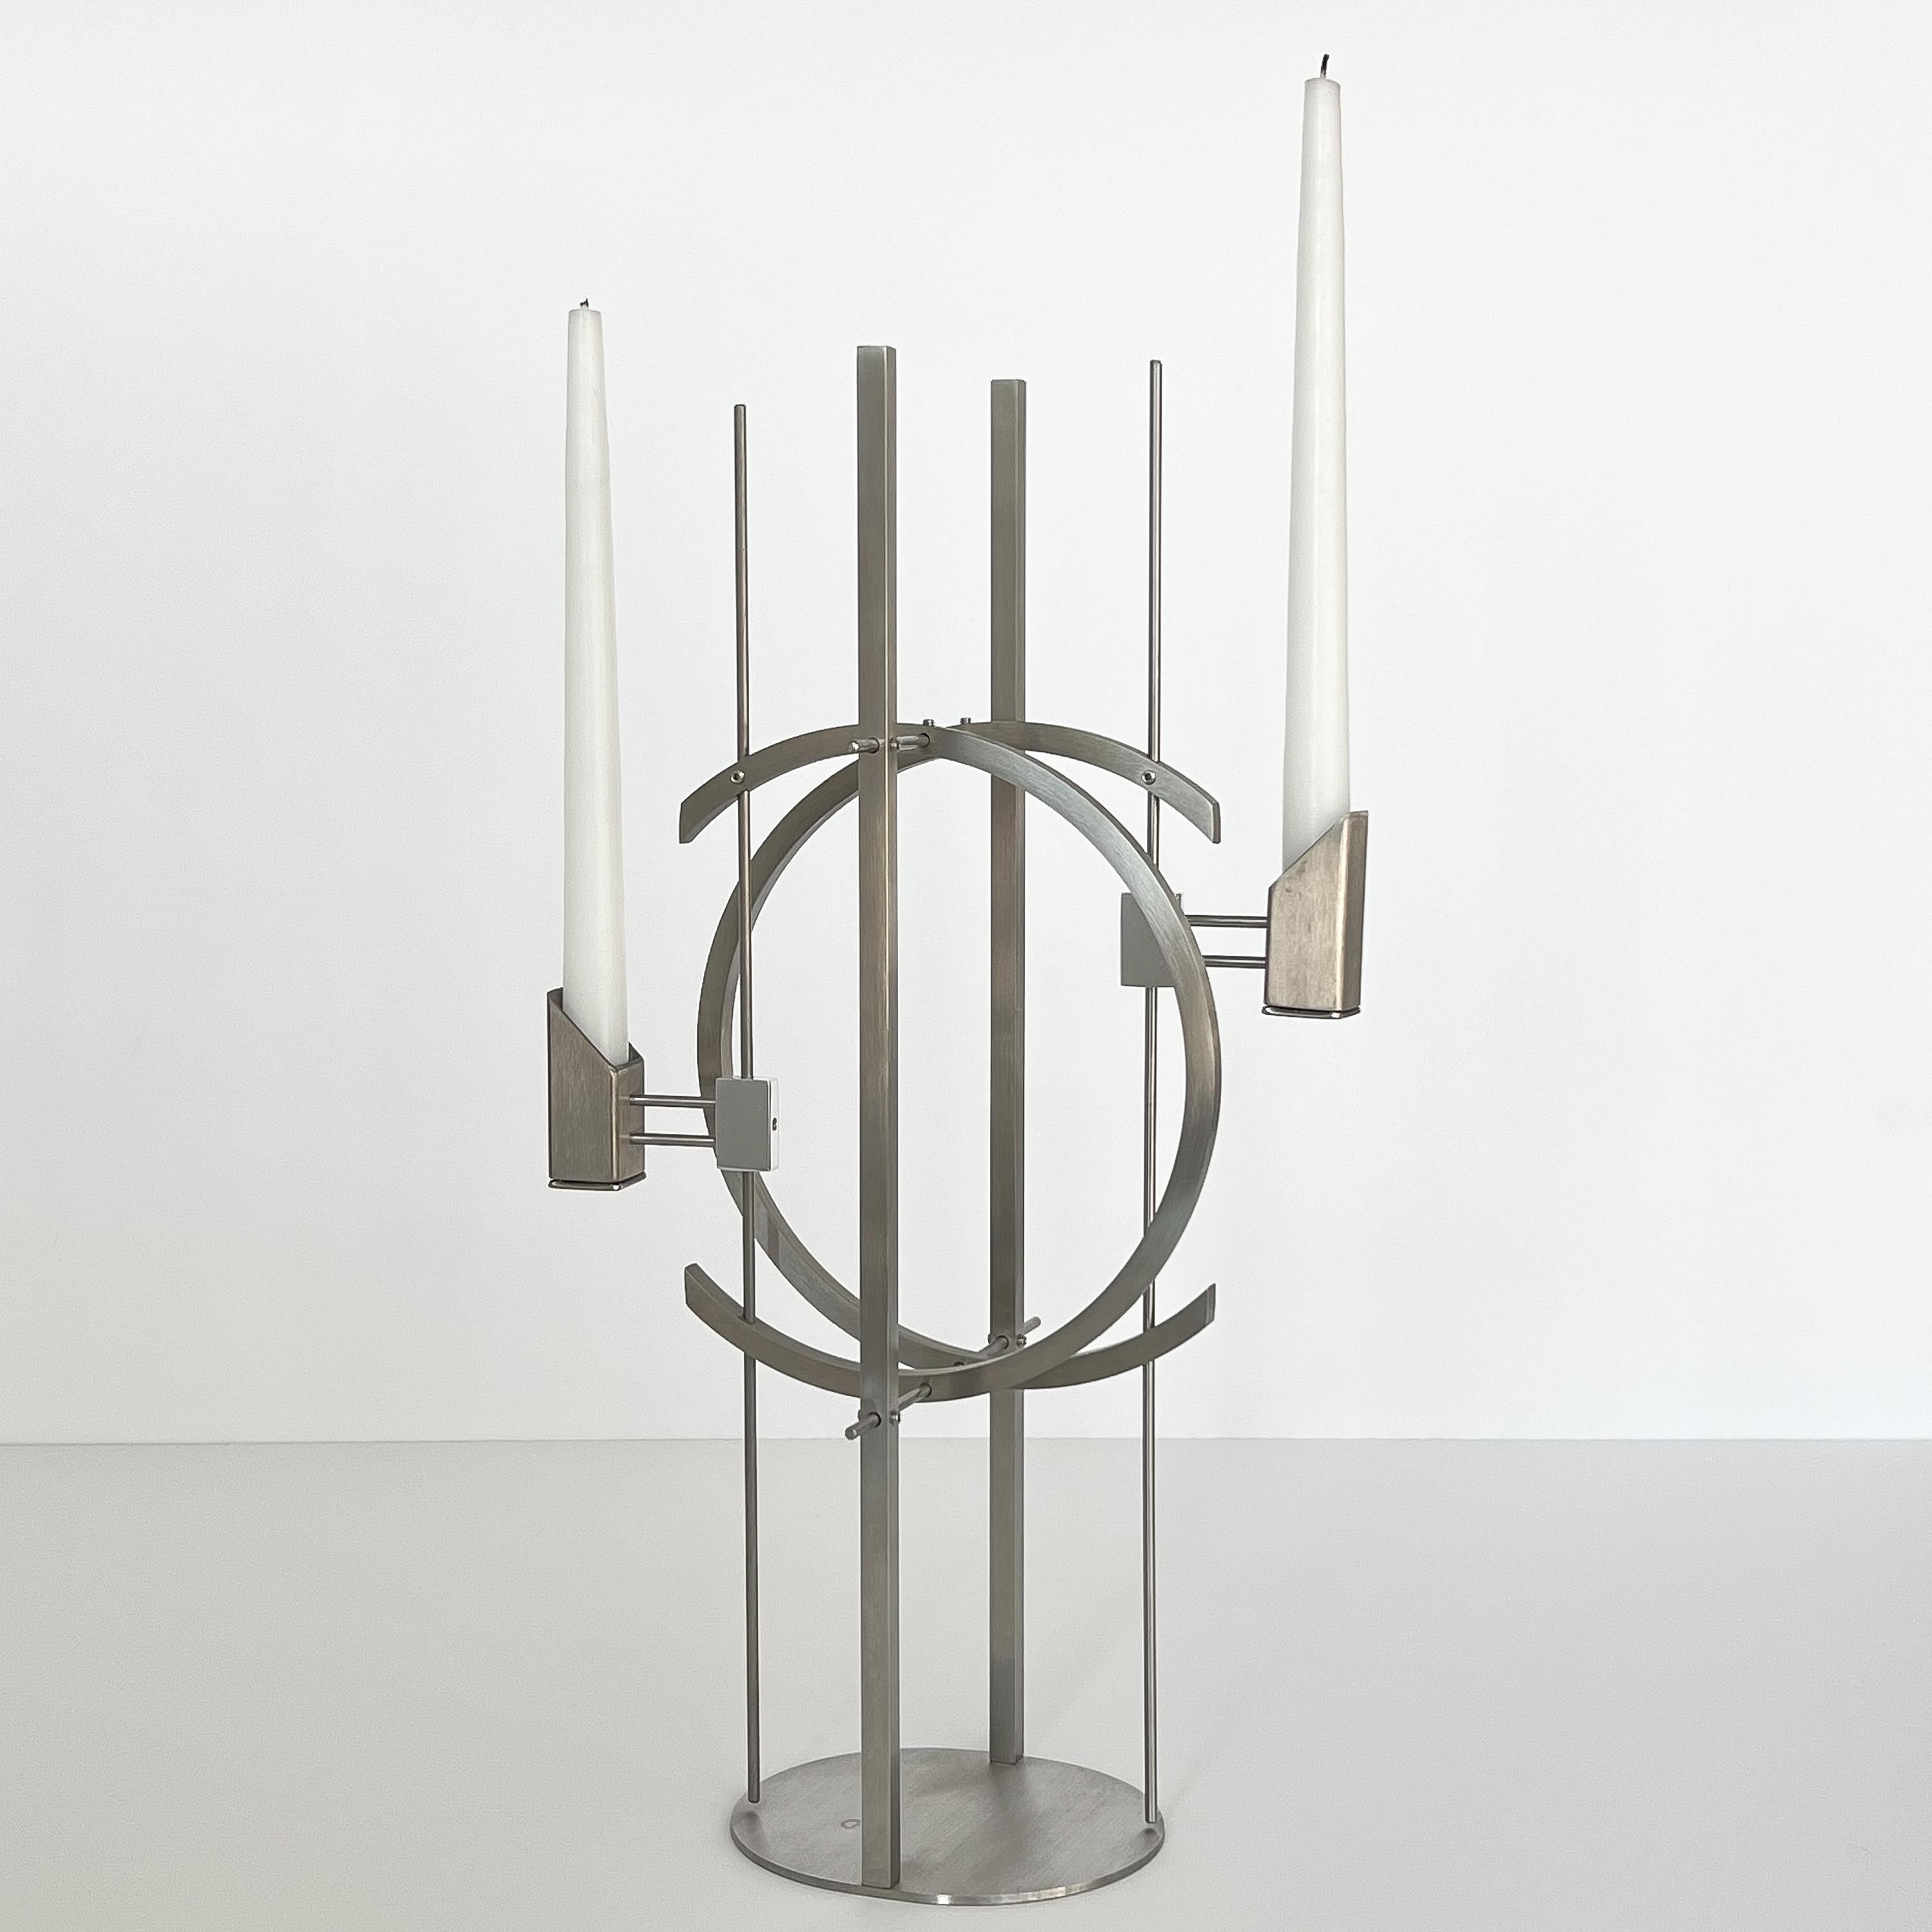 An architectural and sculptural candle holder by David Zelman, USA circa 1980s. Produced through Zelman's design firm Prologue 2000. Postmodern and industrial in design. The firm's work utilizes Industrial images to create beautiful formed